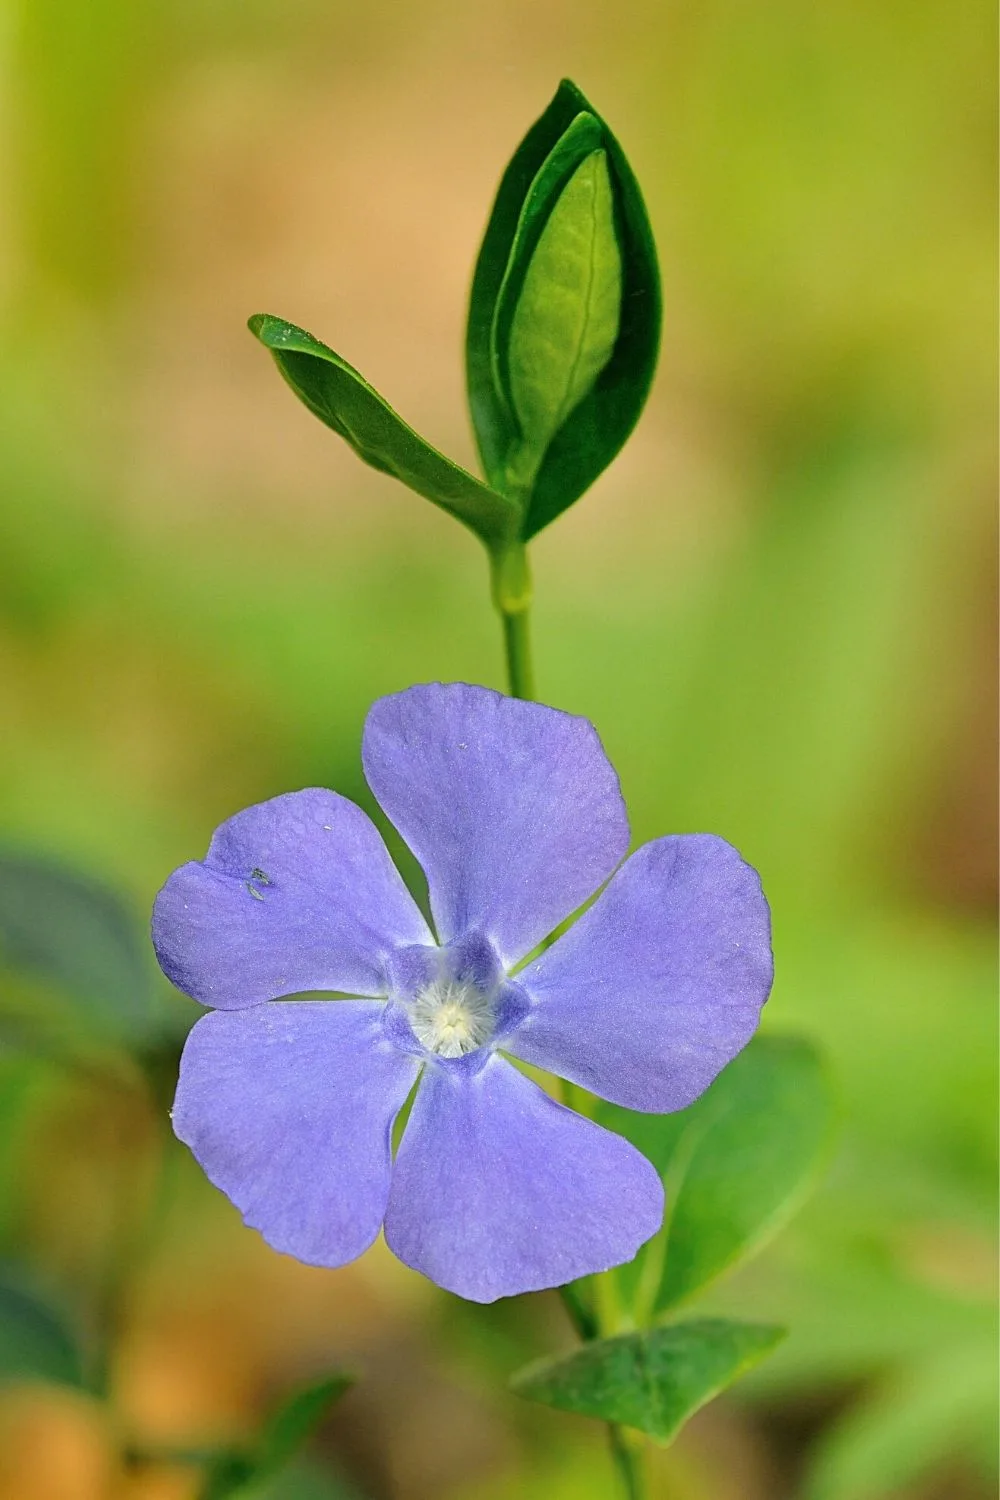 Vinca Minor is a low-maintenance plant you can grow in the north-facing side of the house